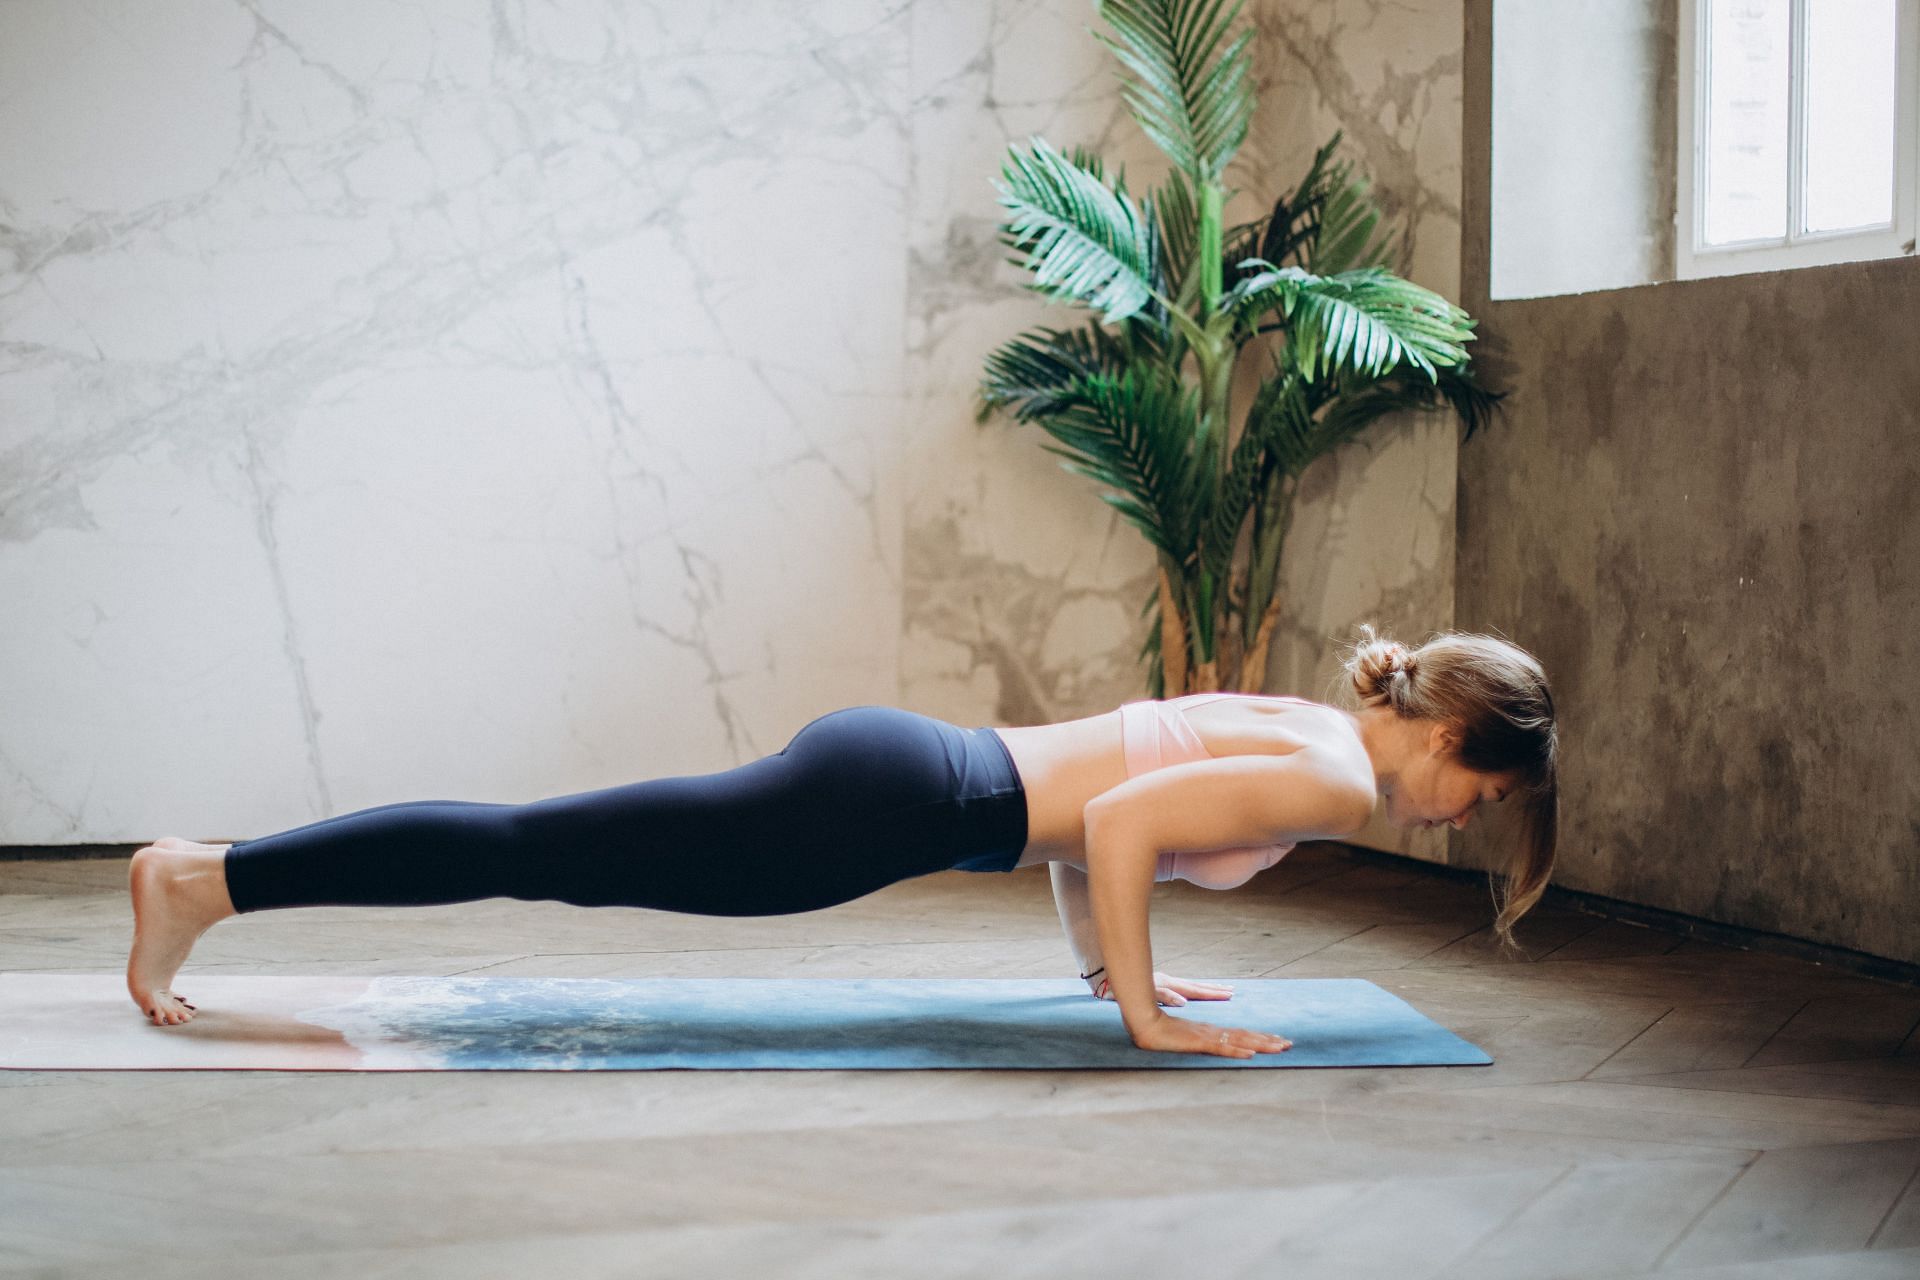 Plank twist: How to do it and the benefits for sculpting a strong core |  Tom's Guide